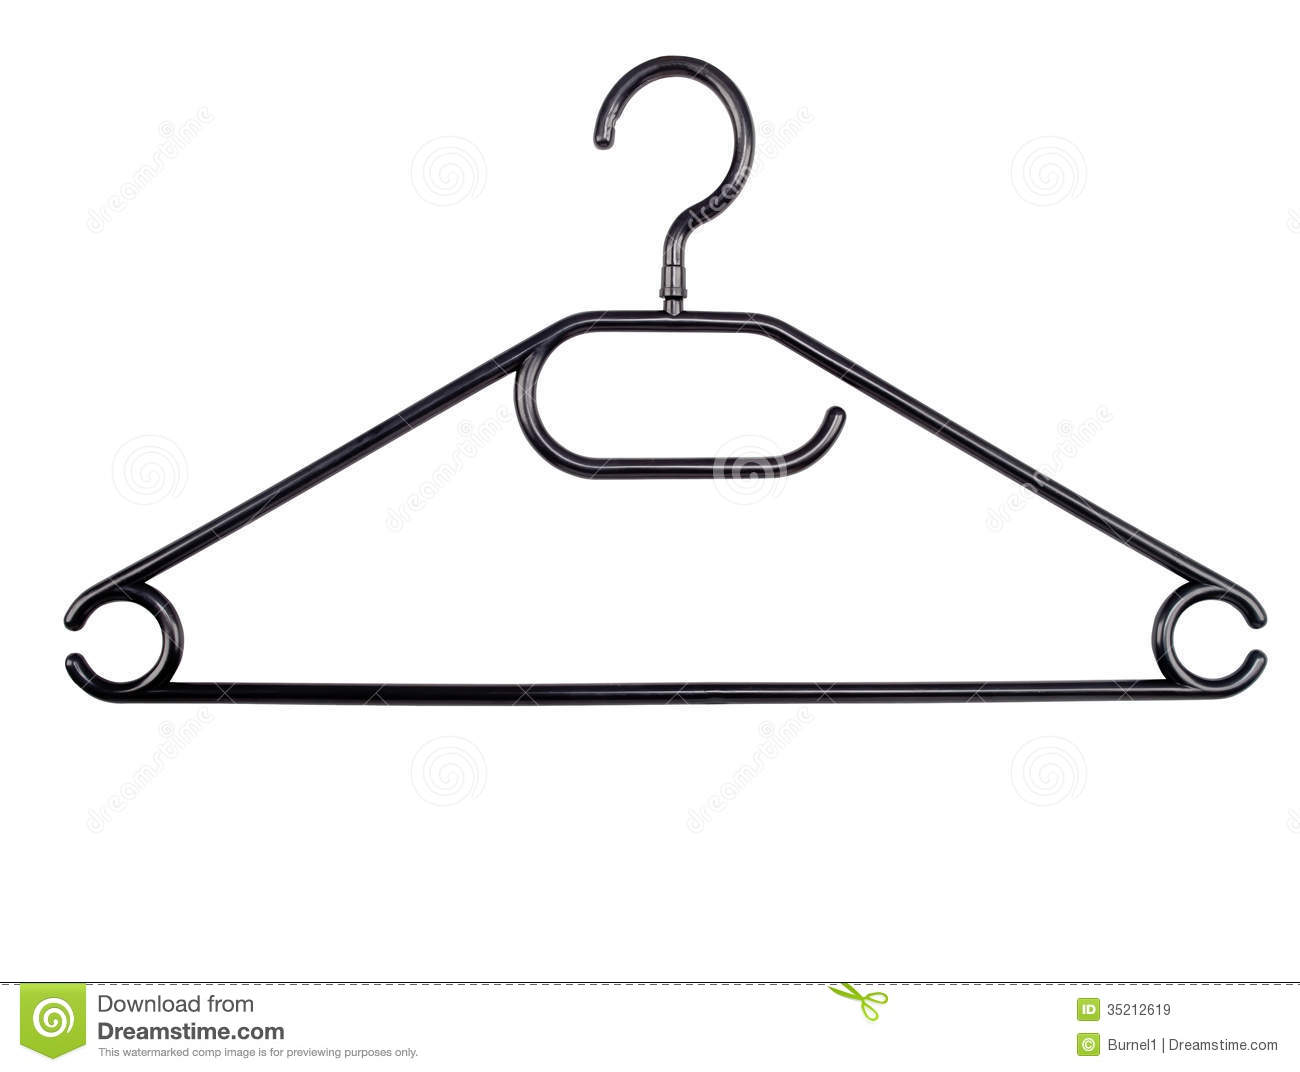 Black And White Dress On A Hanger Clipart   Cliparthut   Free Clipart